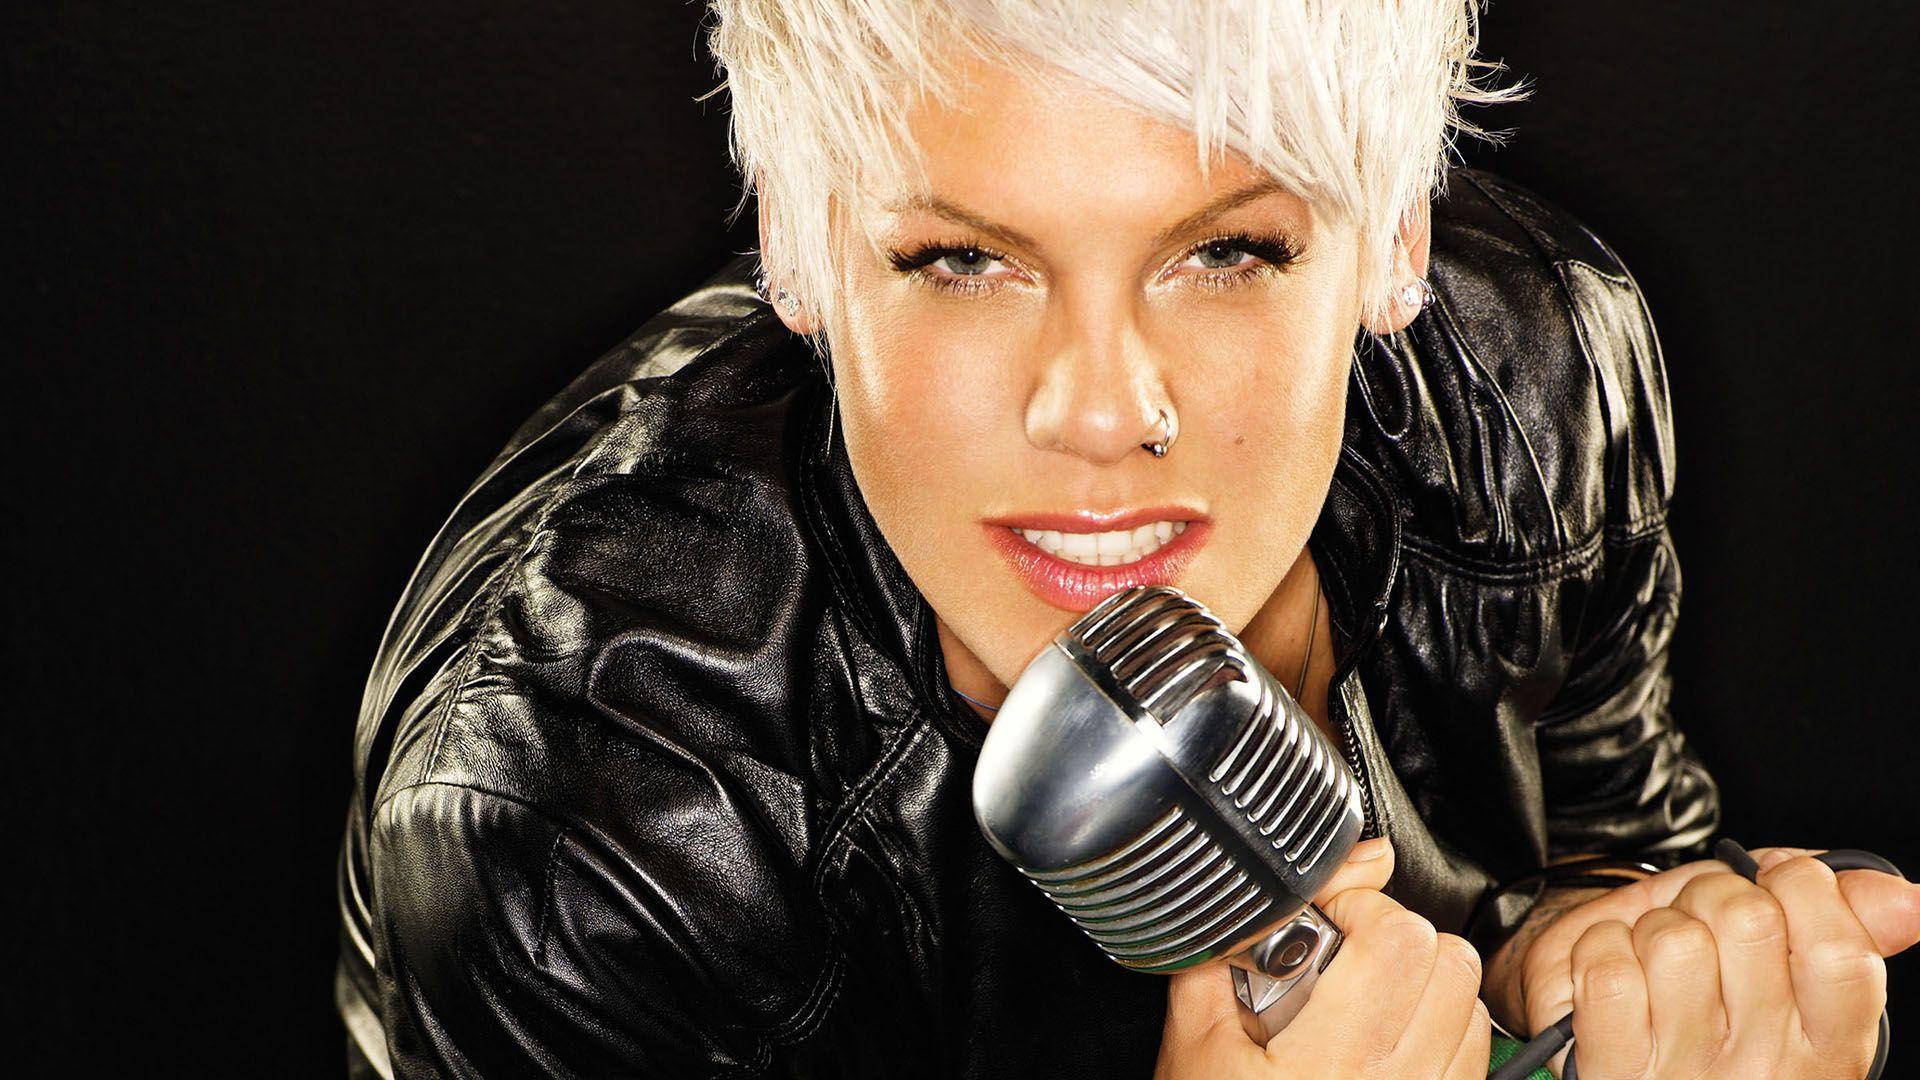 Pink The Singer Wallpapers 5759 HD Wallpapers